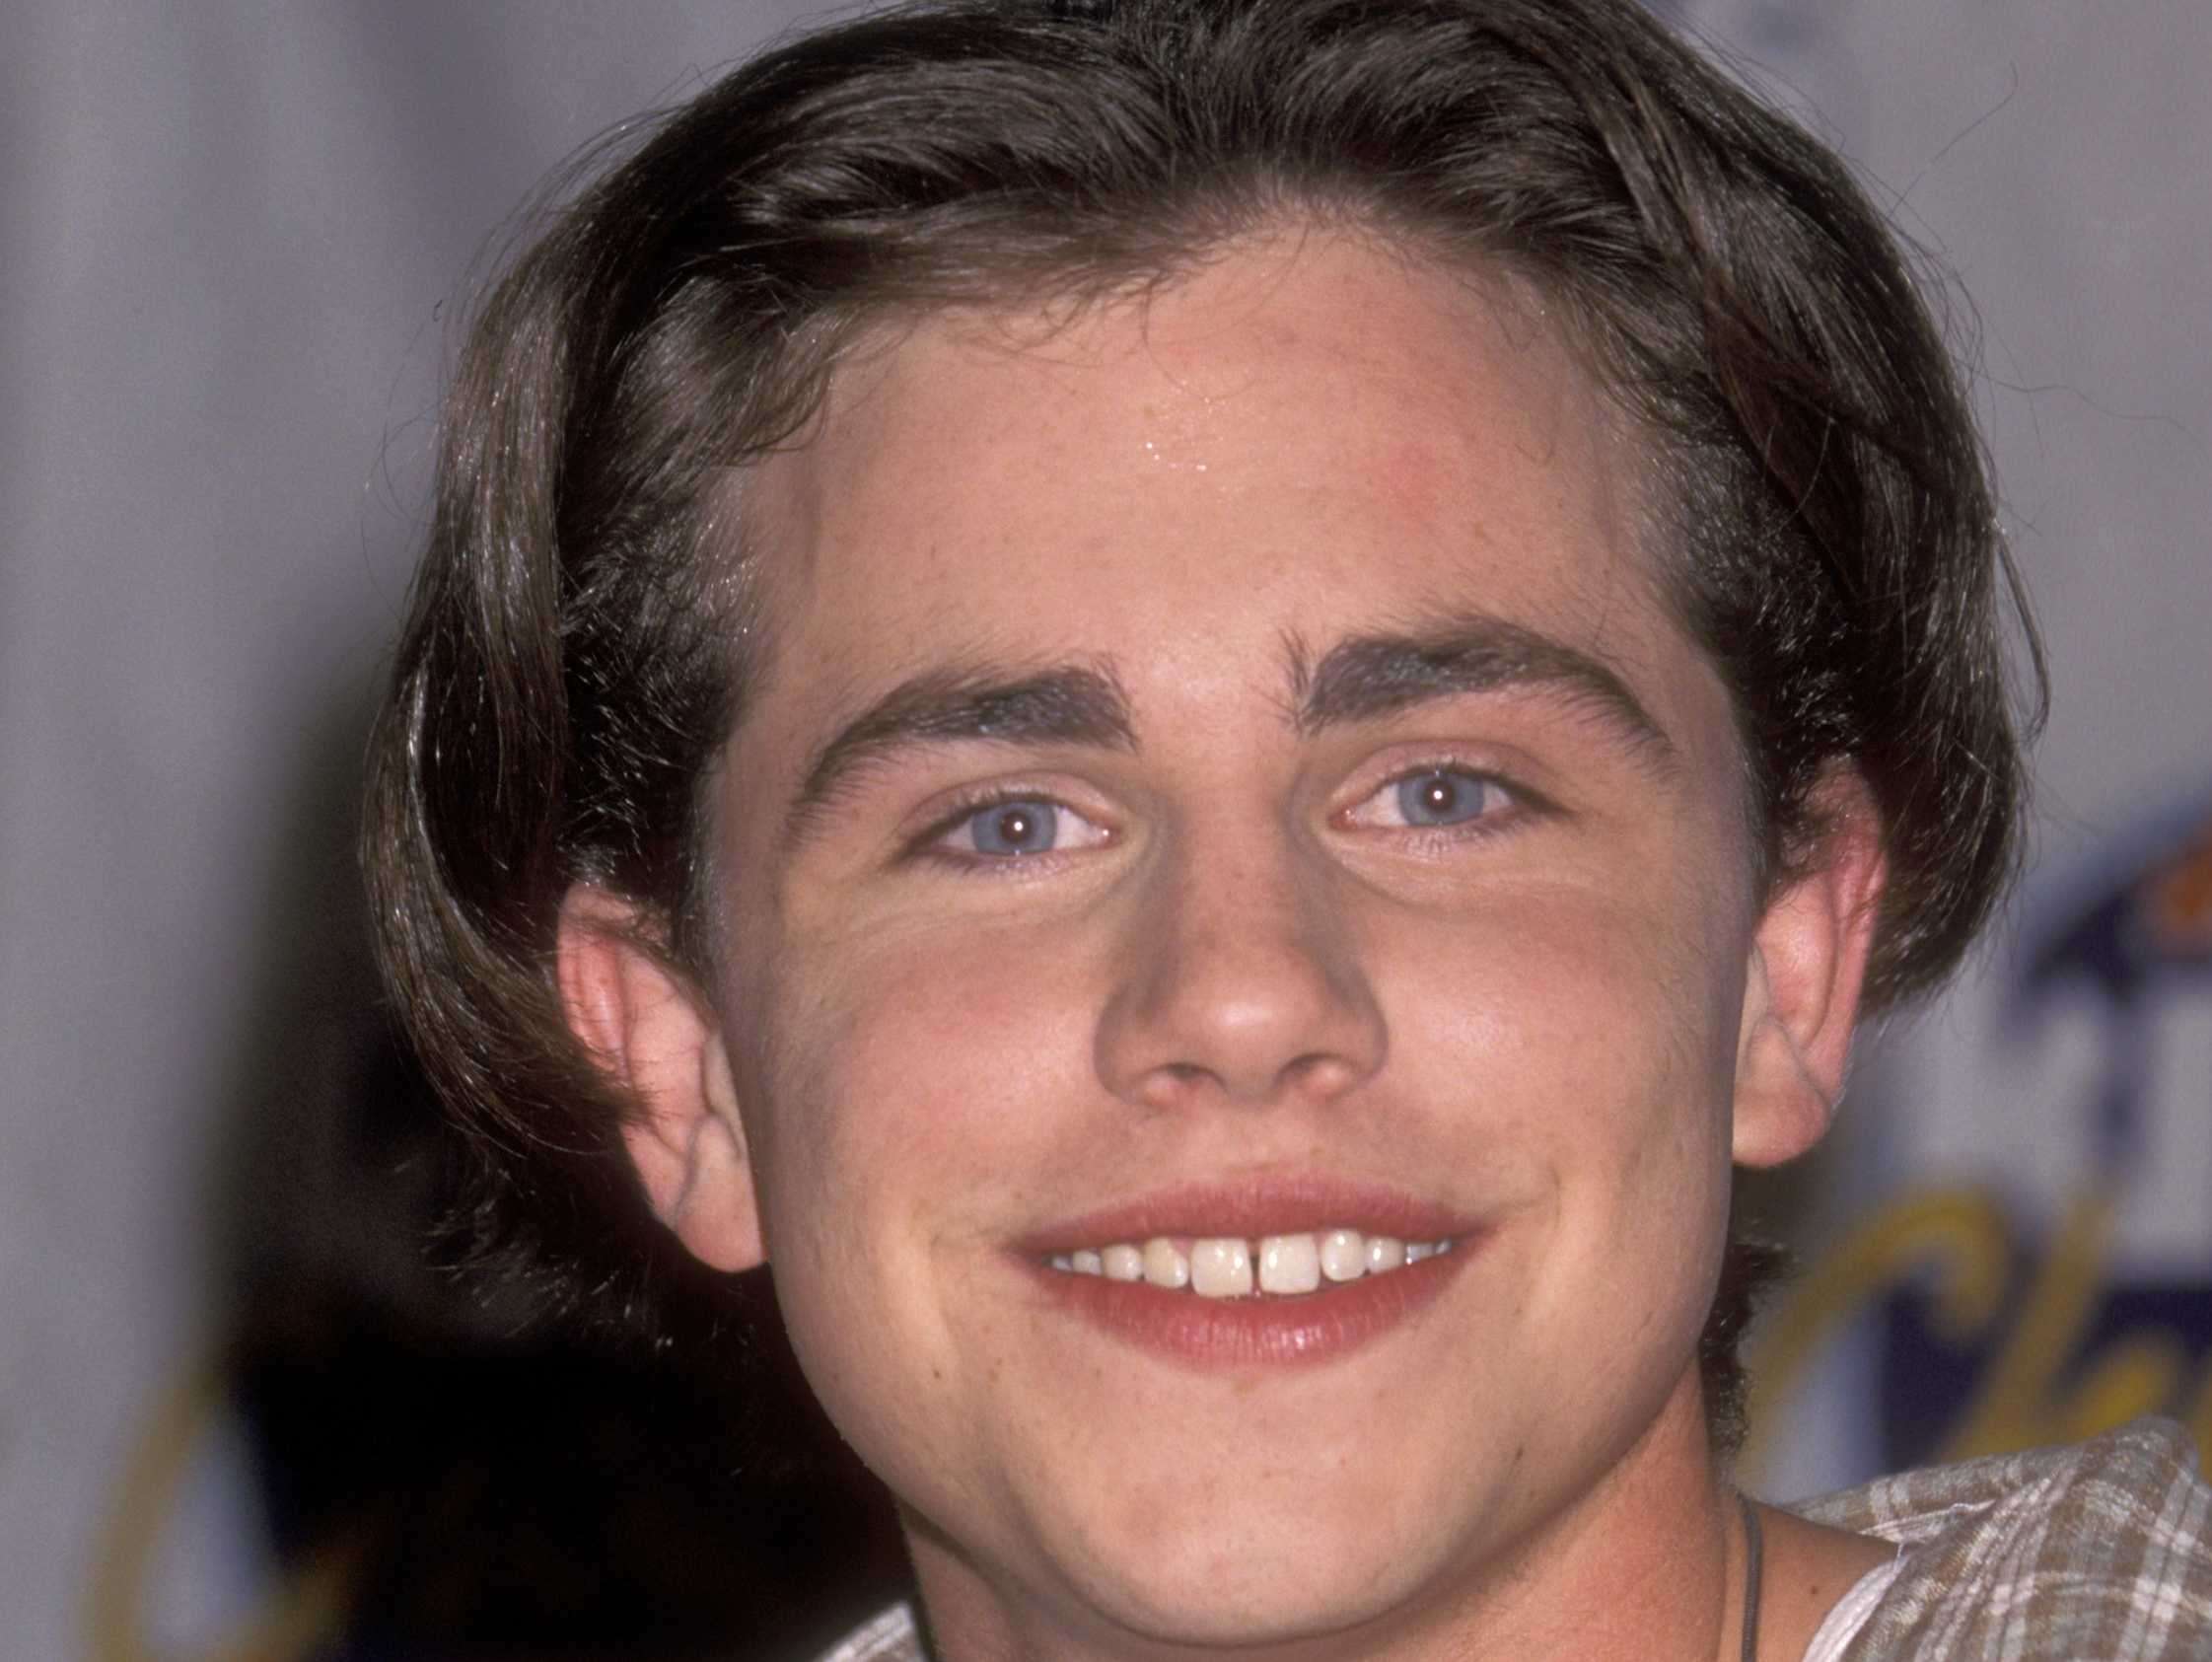 Rider Strong played Shawn Hunter, Cory's best friend and sidekick on